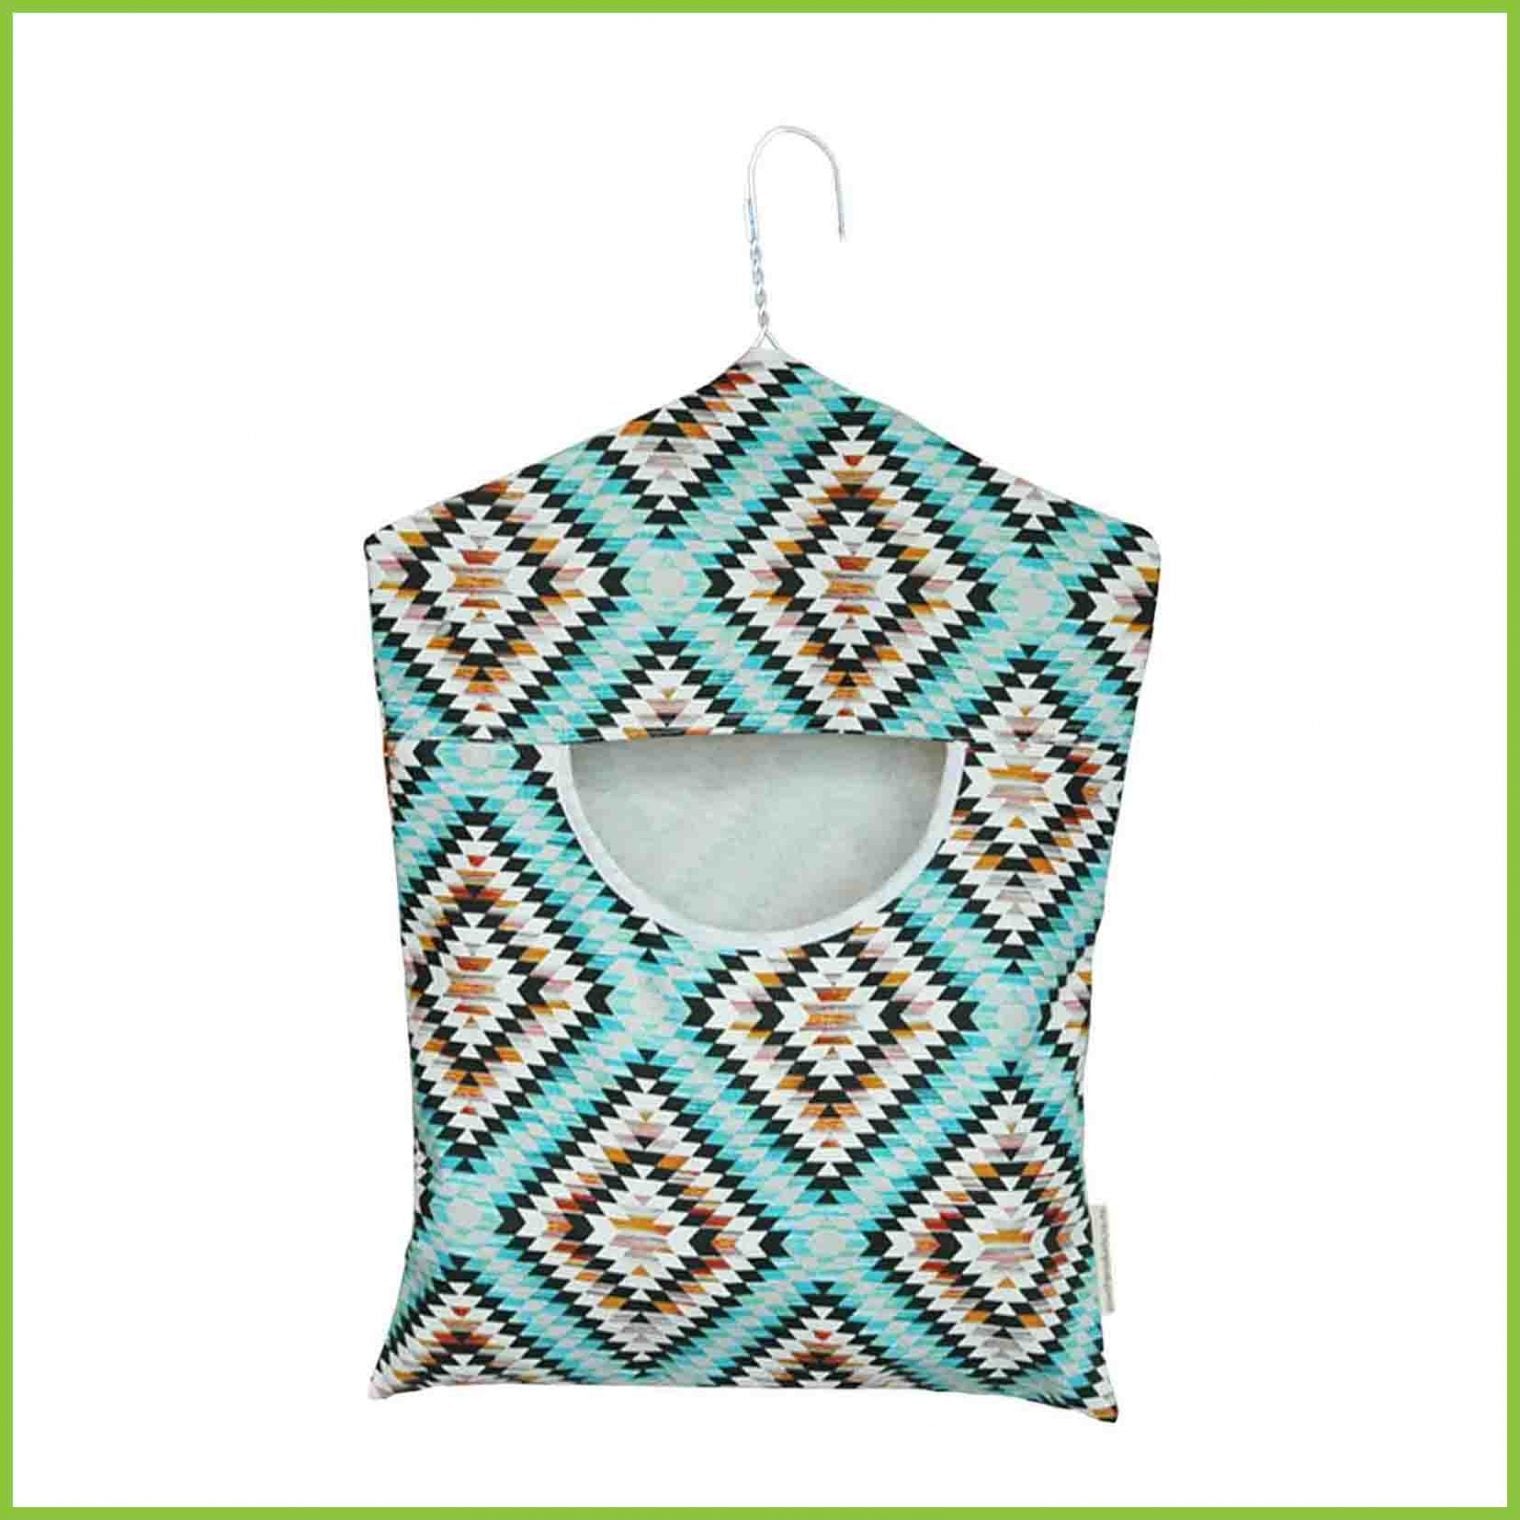 A cotton peg bag with an abstract aztec design in blue and grey.